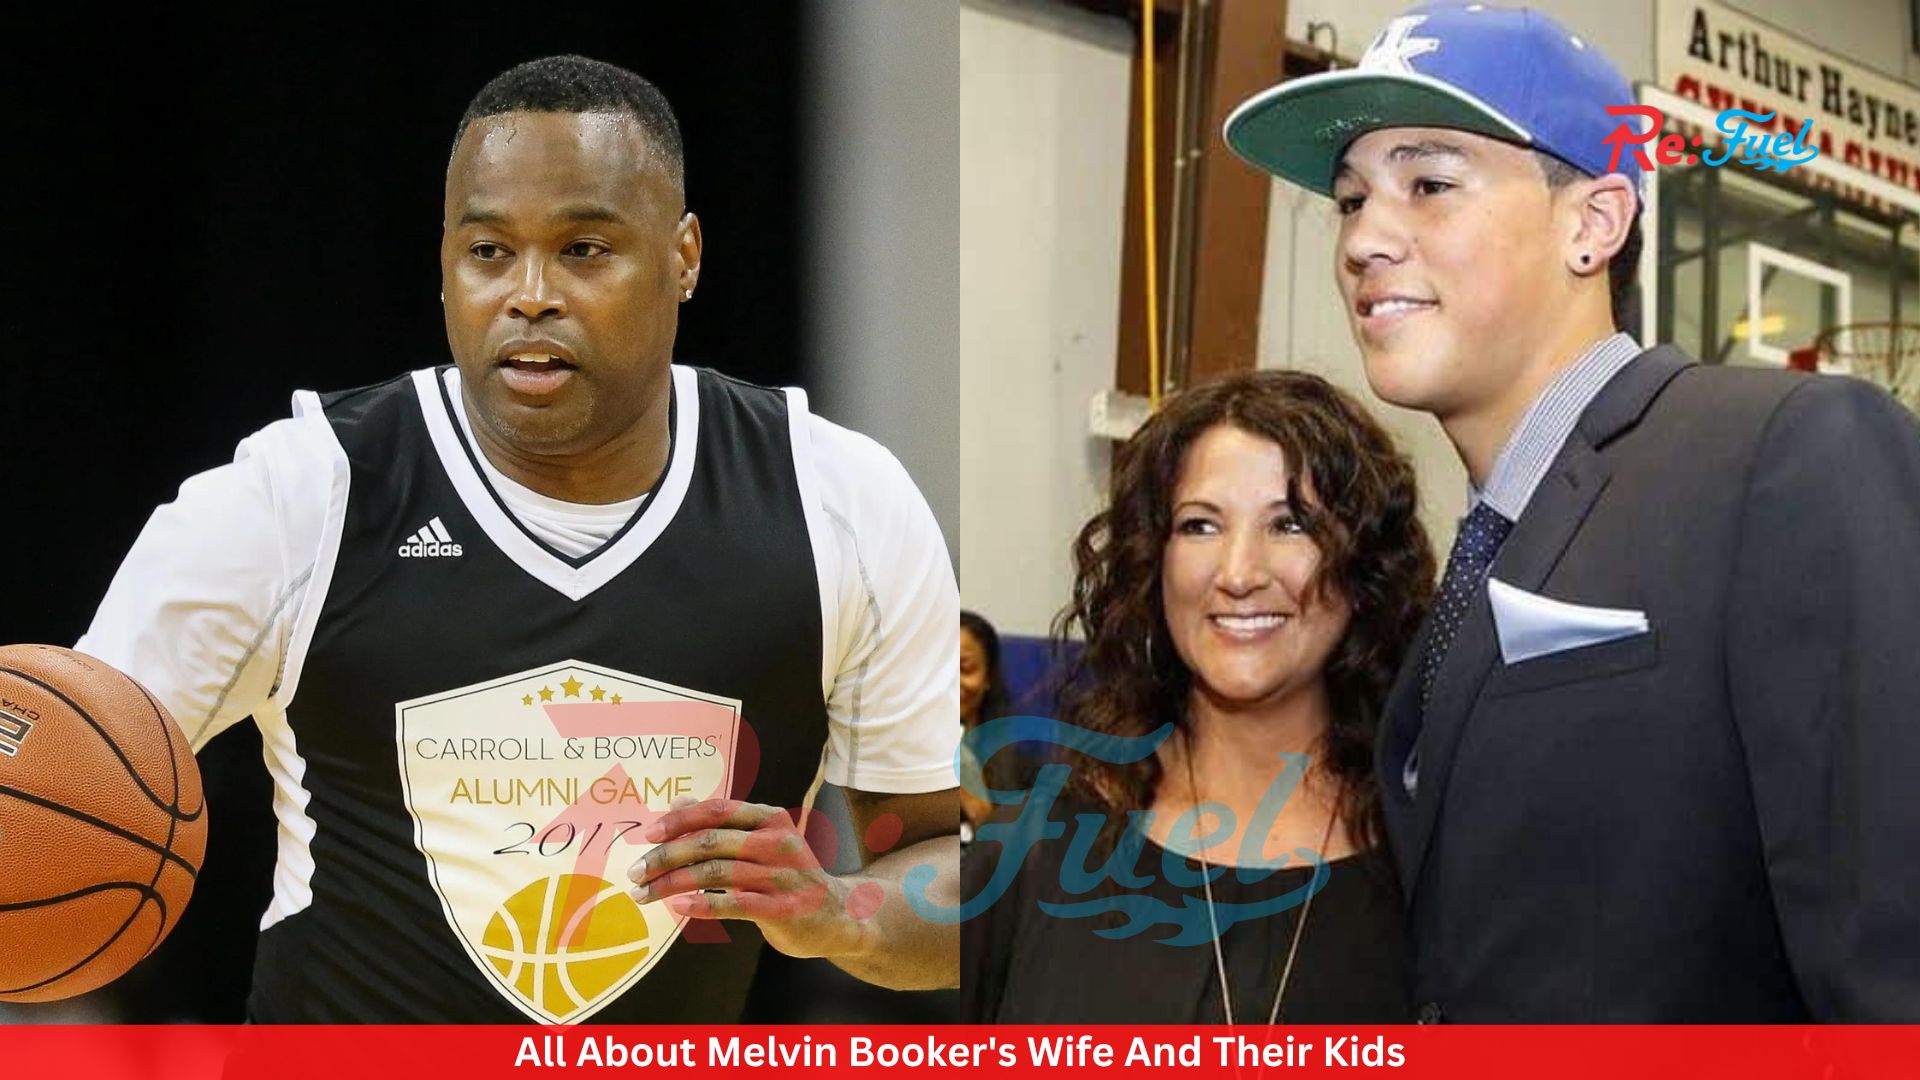 All About Melvin Booker's Wife And Their Kids